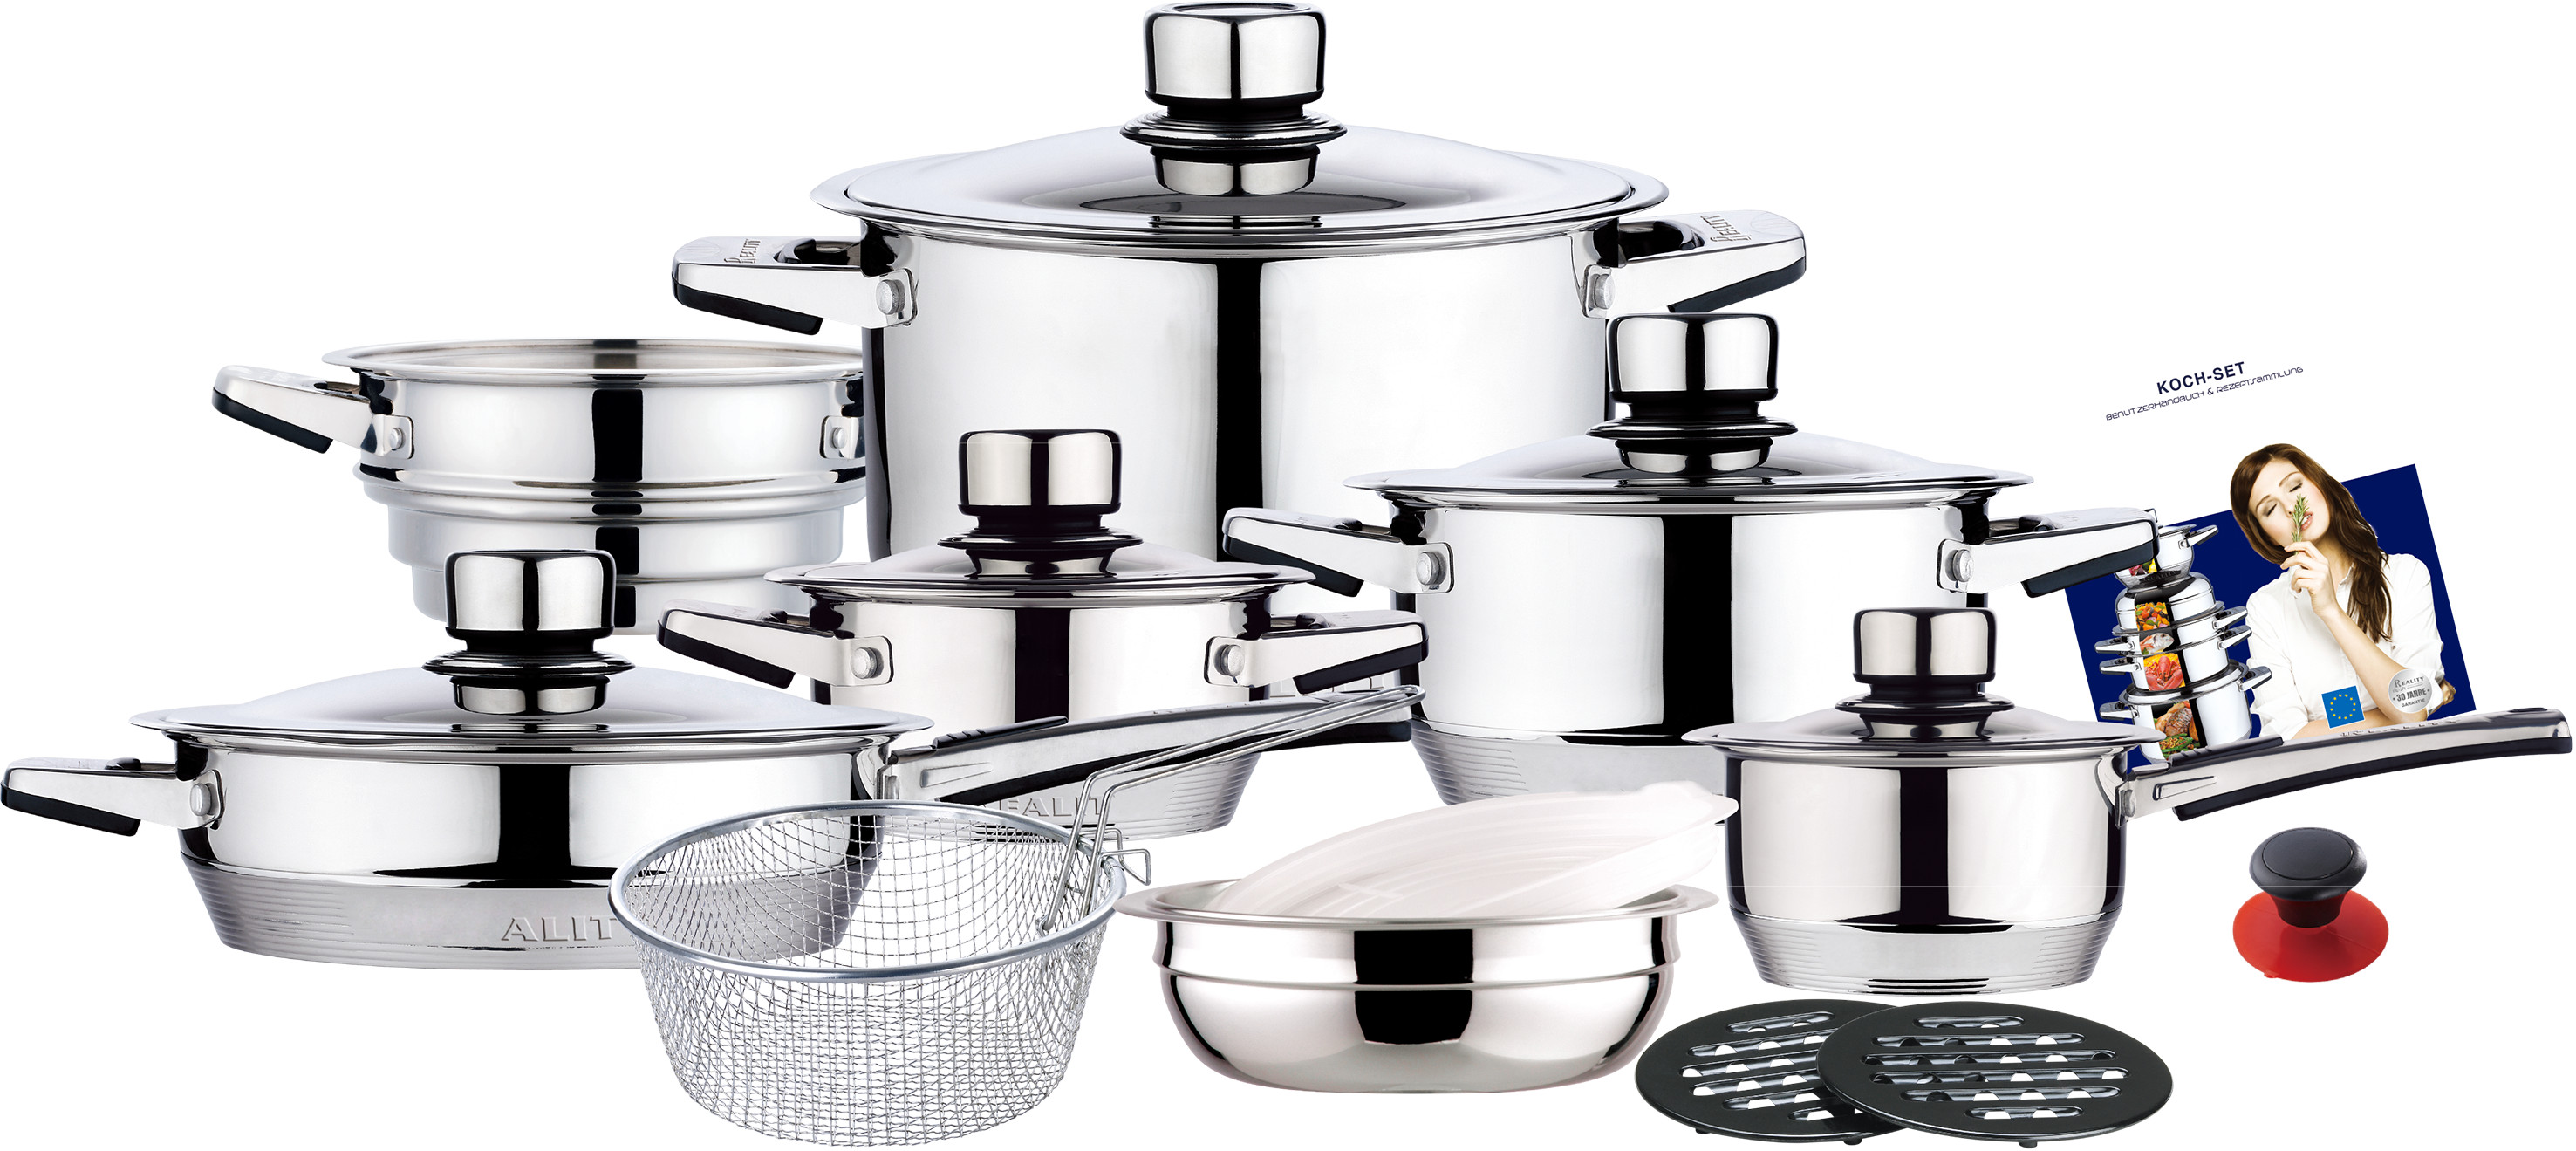 19pcs straight shape stainless steel cookware set with strong revit handle